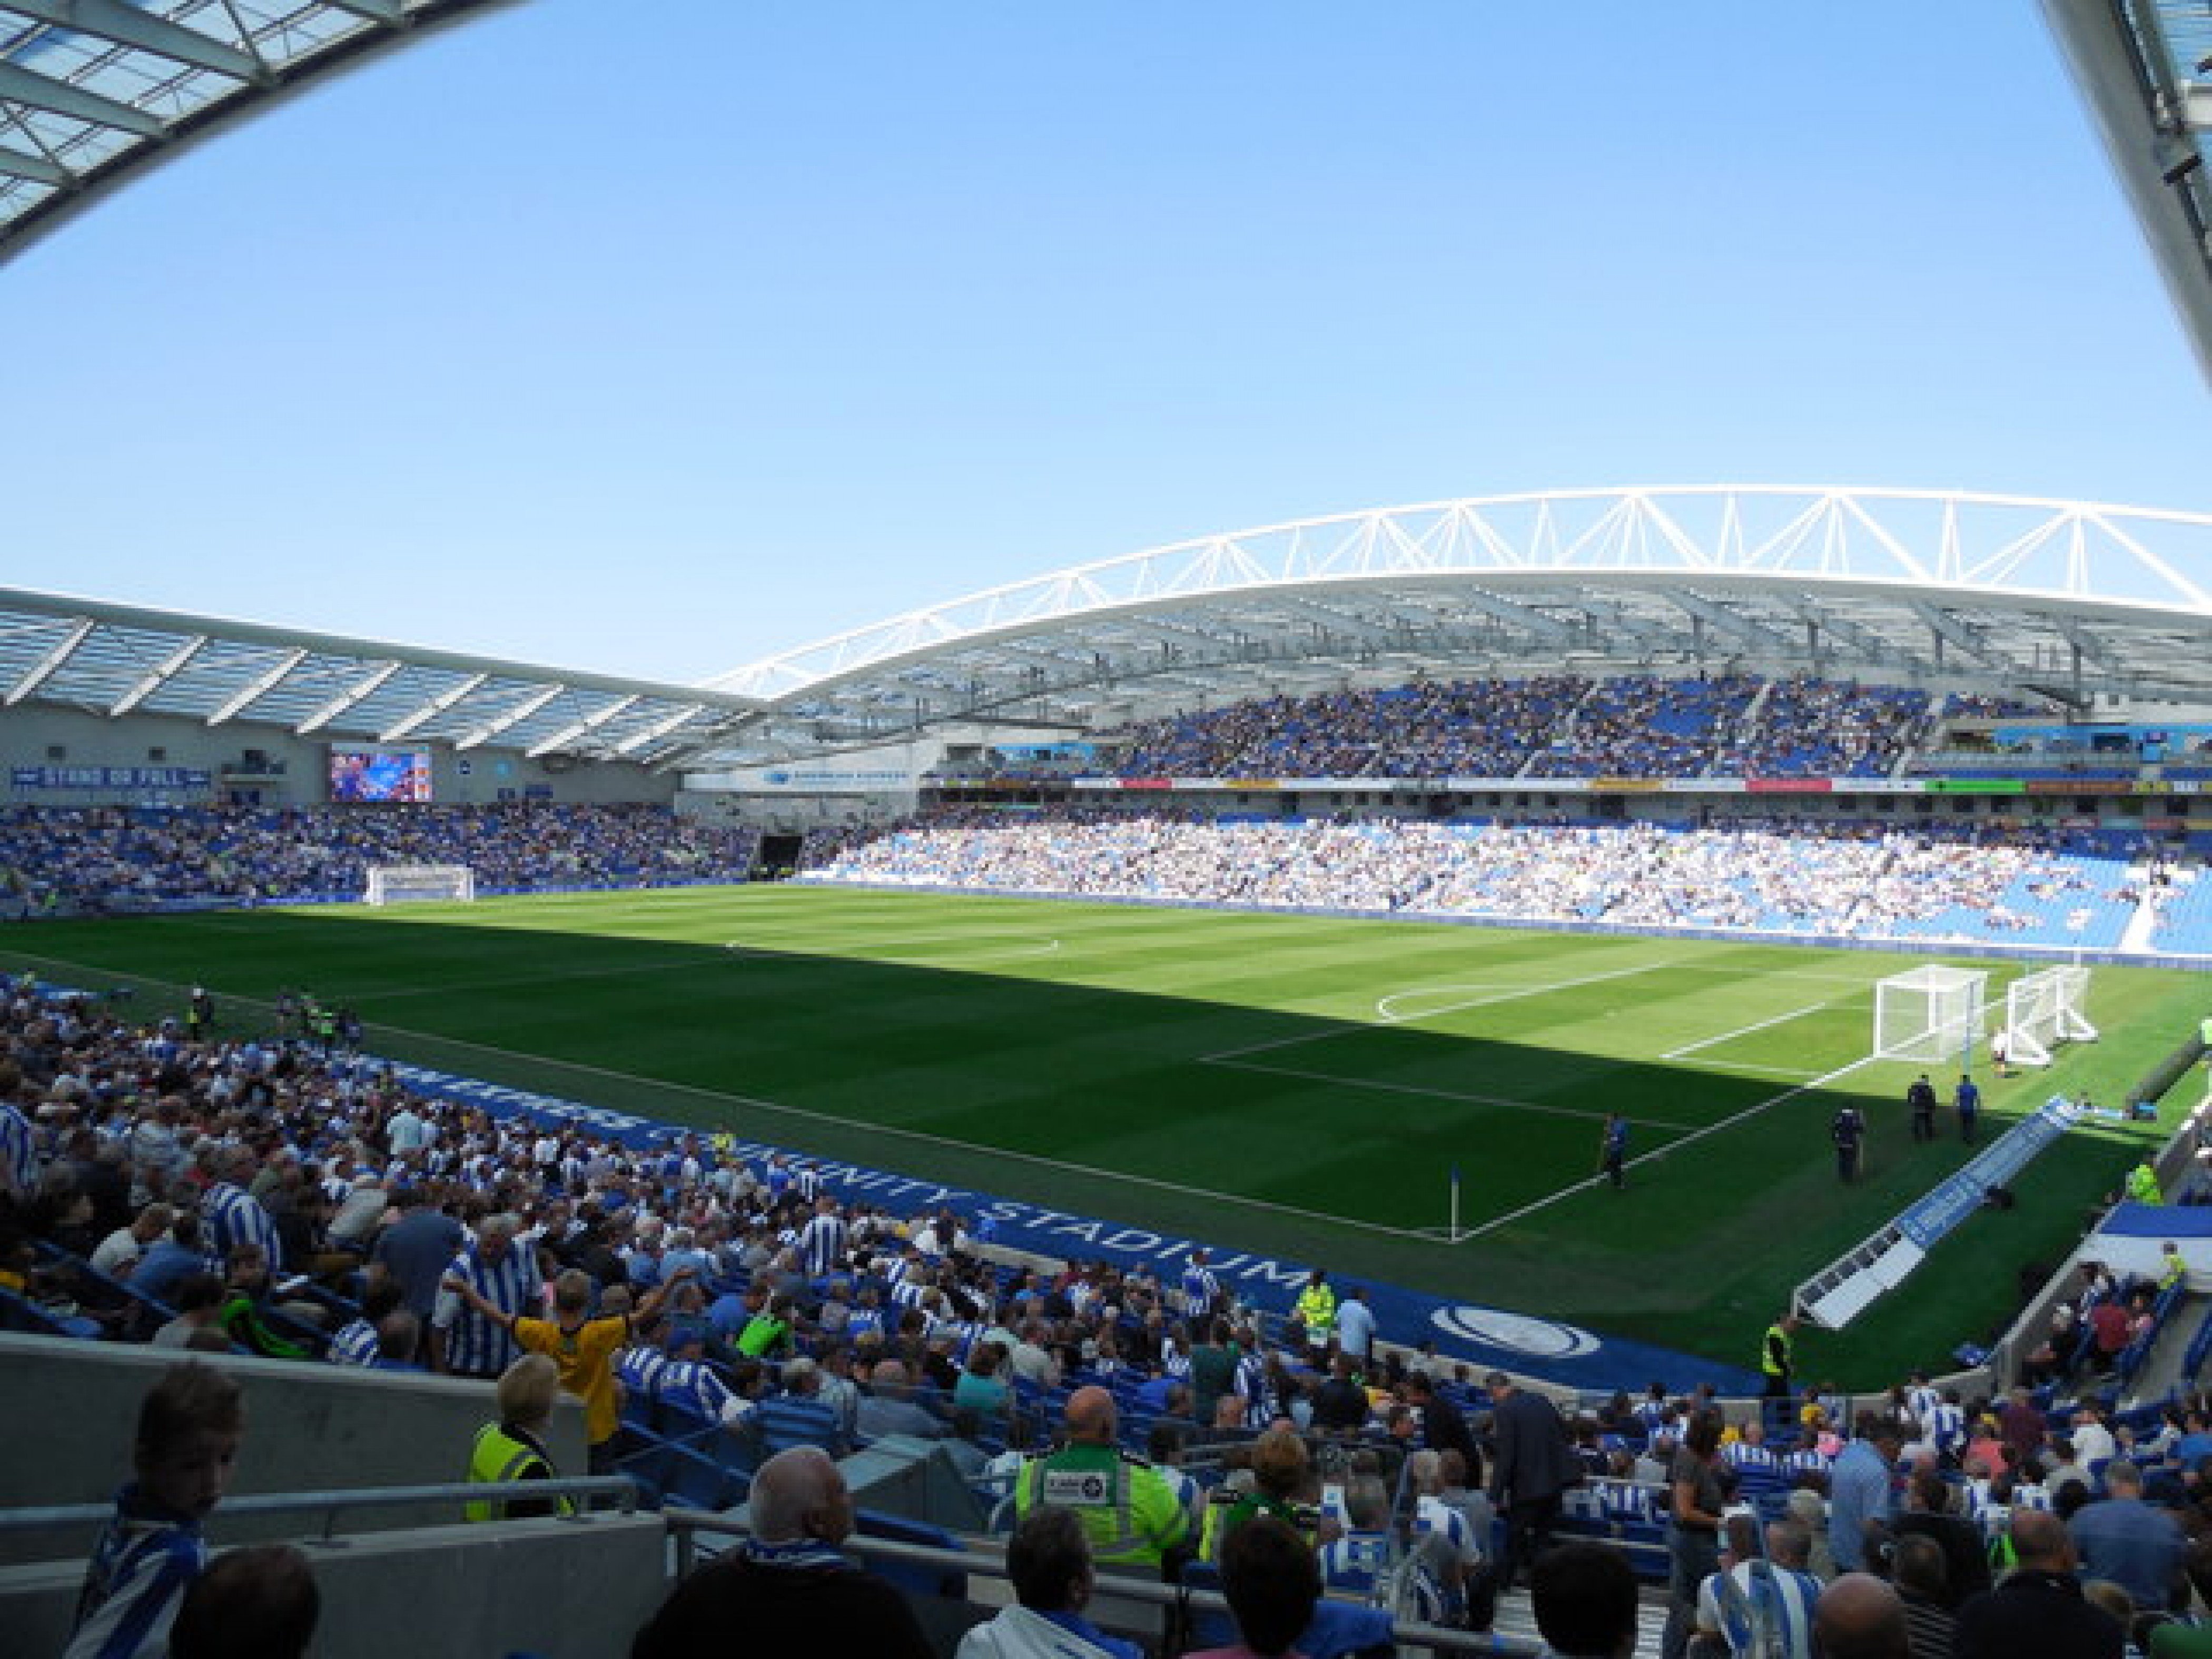 Brighton & Hove Albion 1-2 Tottenham Hotspur: Nervy Lilywhites end losing run to get back on track